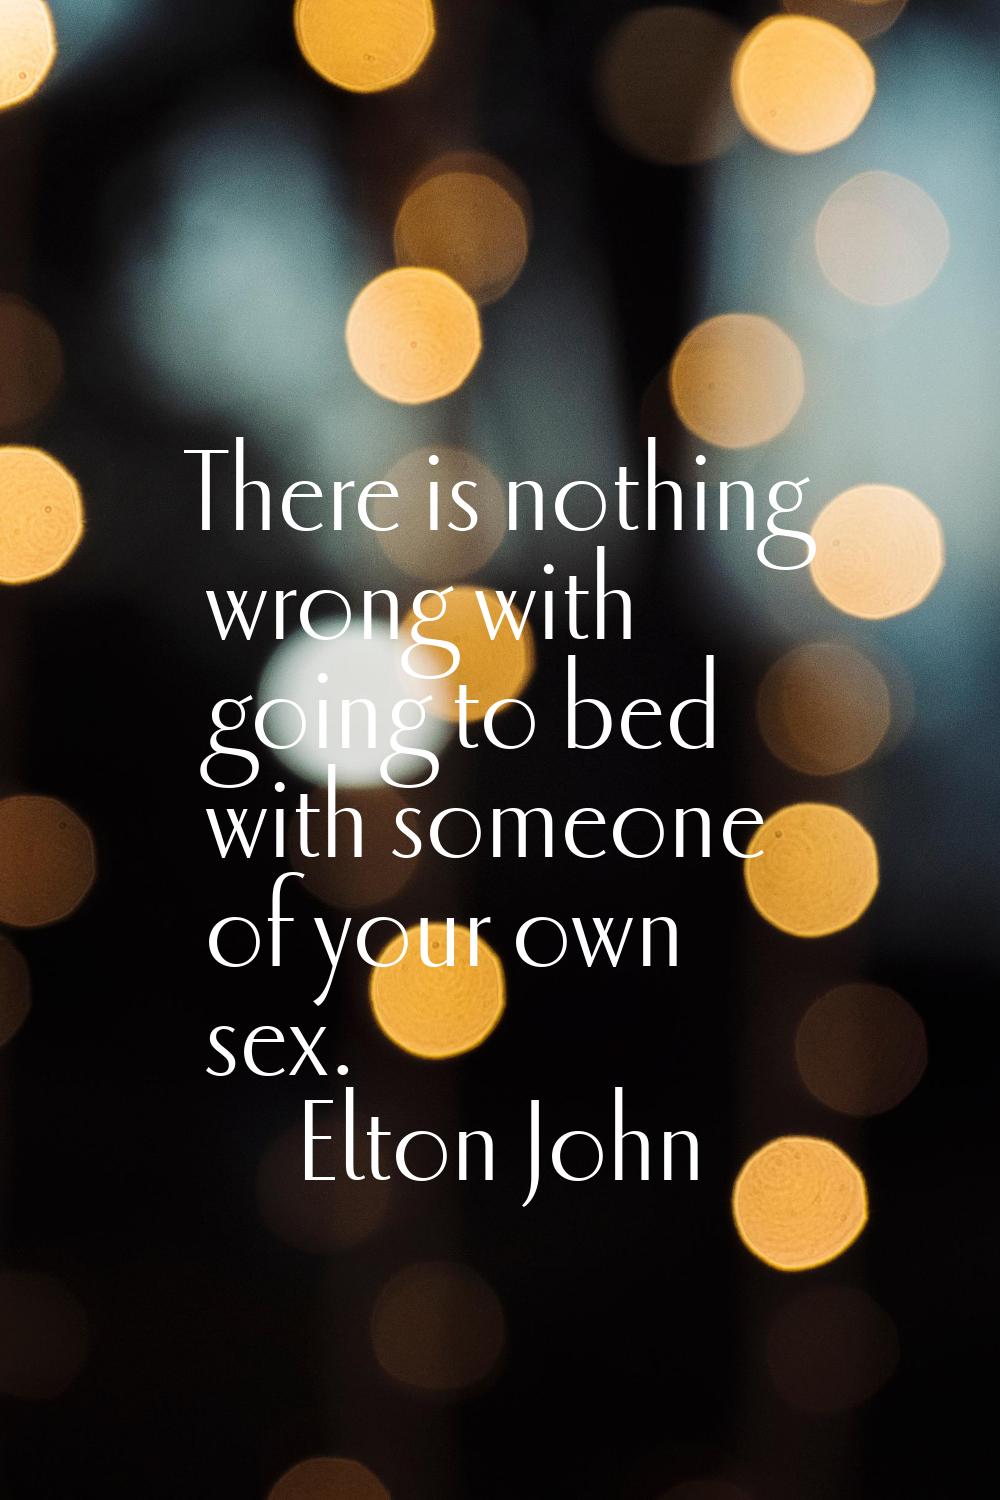 There is nothing wrong with going to bed with someone of your own sex.